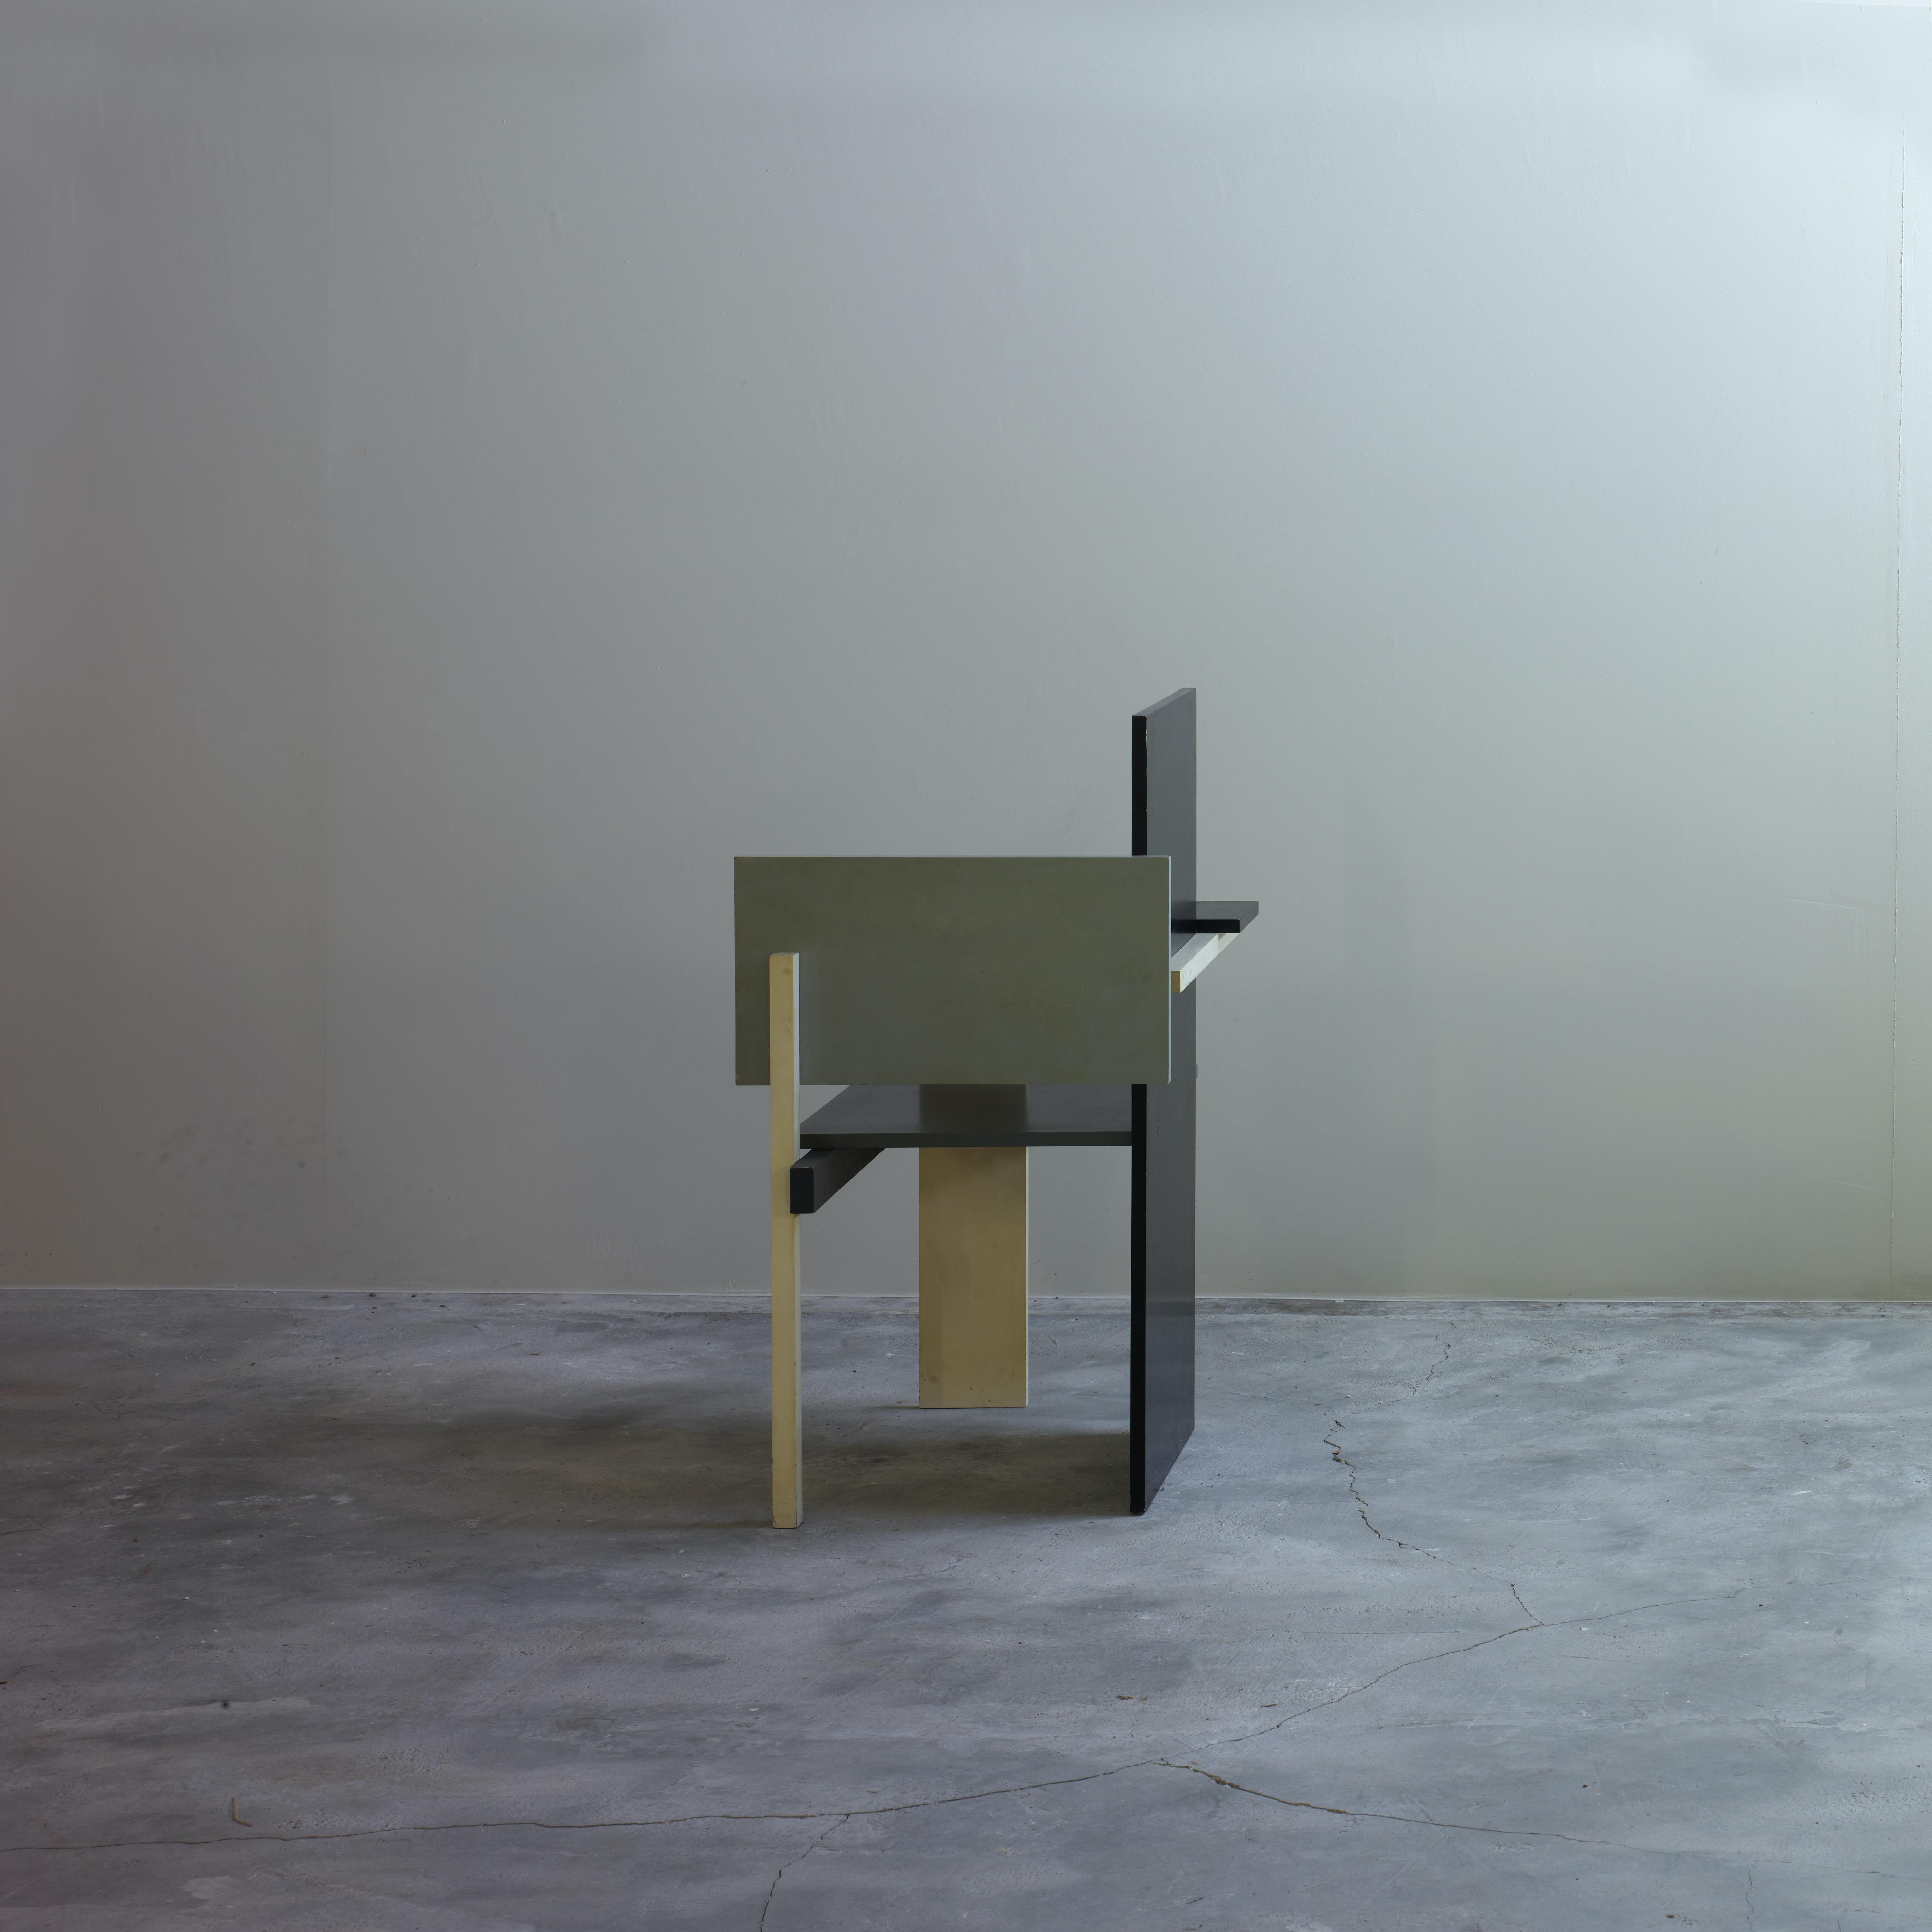 Iconic “Berlin chair” was designed in 1923 by Gerrit Rietveld, and manufactured by G.A.v.d. Groenekan De Bilt Nederland in between 1972-1974. Beside the 